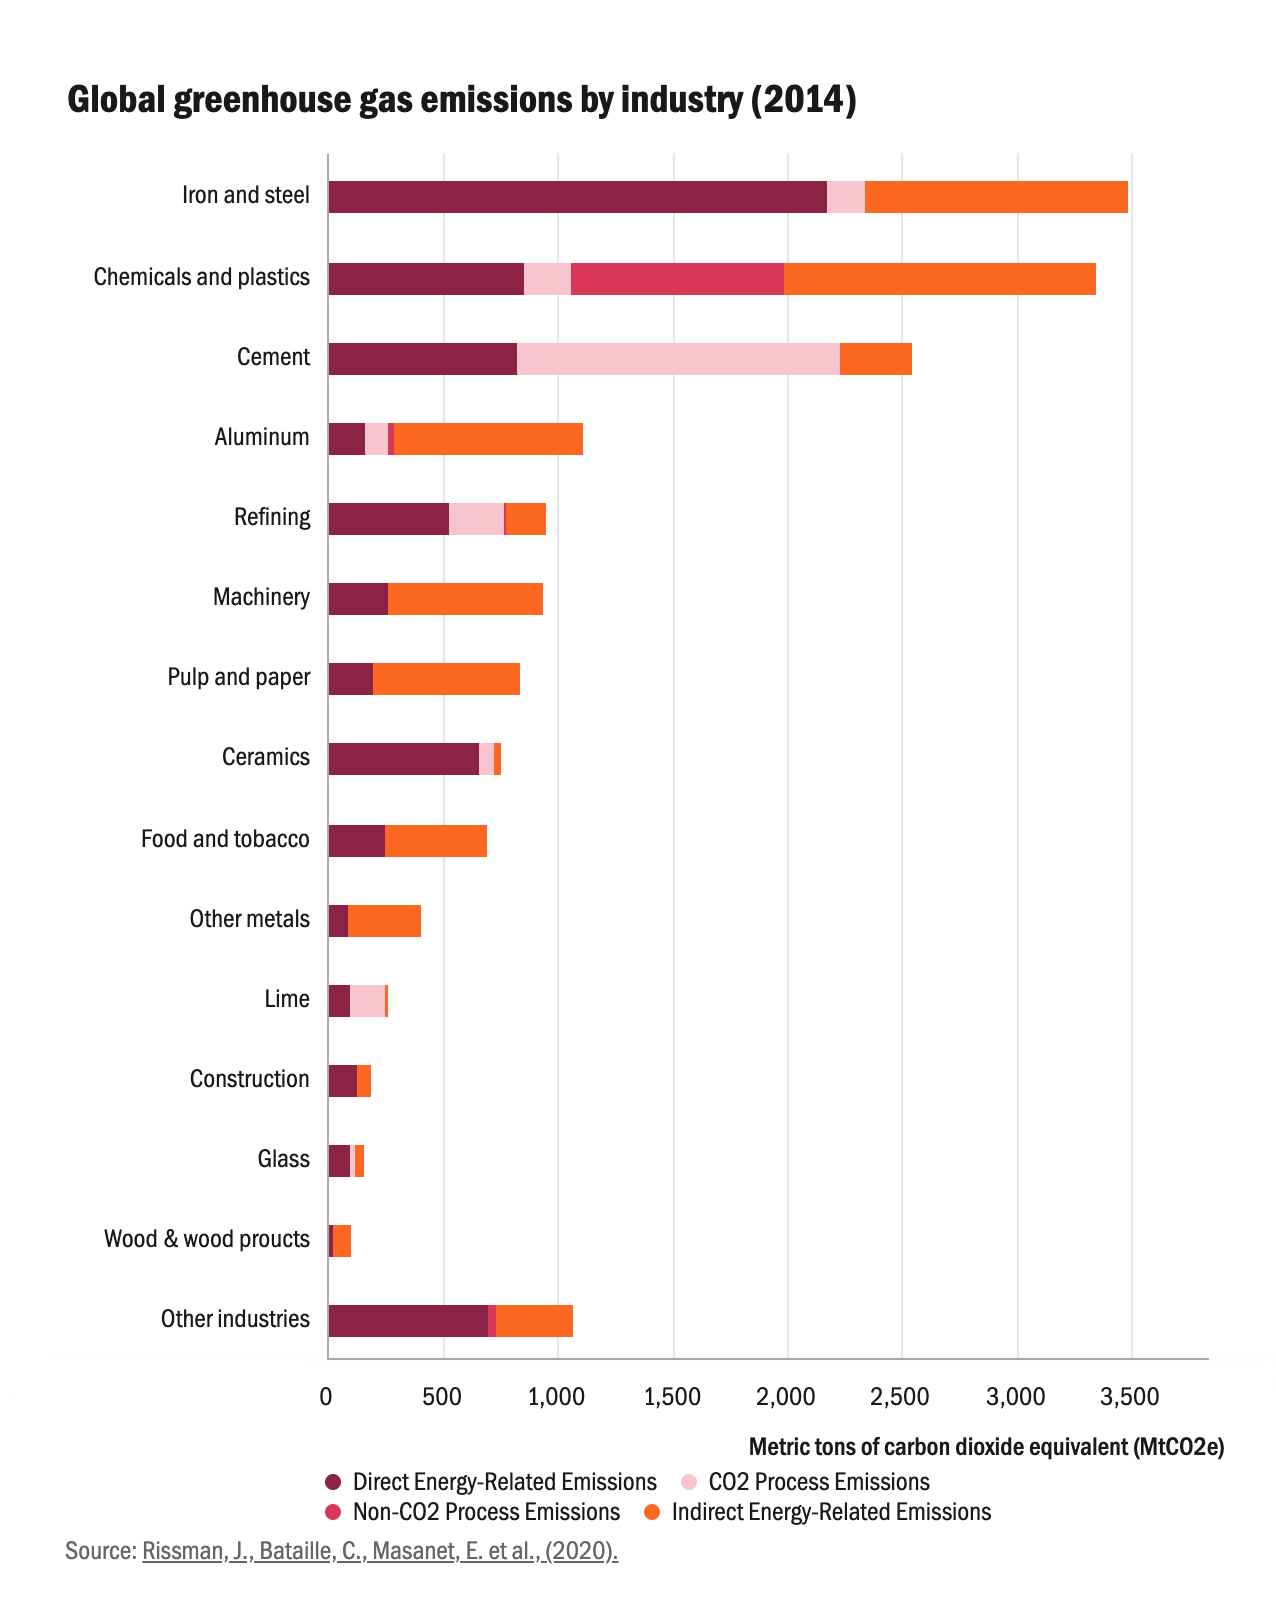 Global greenhouse gas emissions by industry 2014